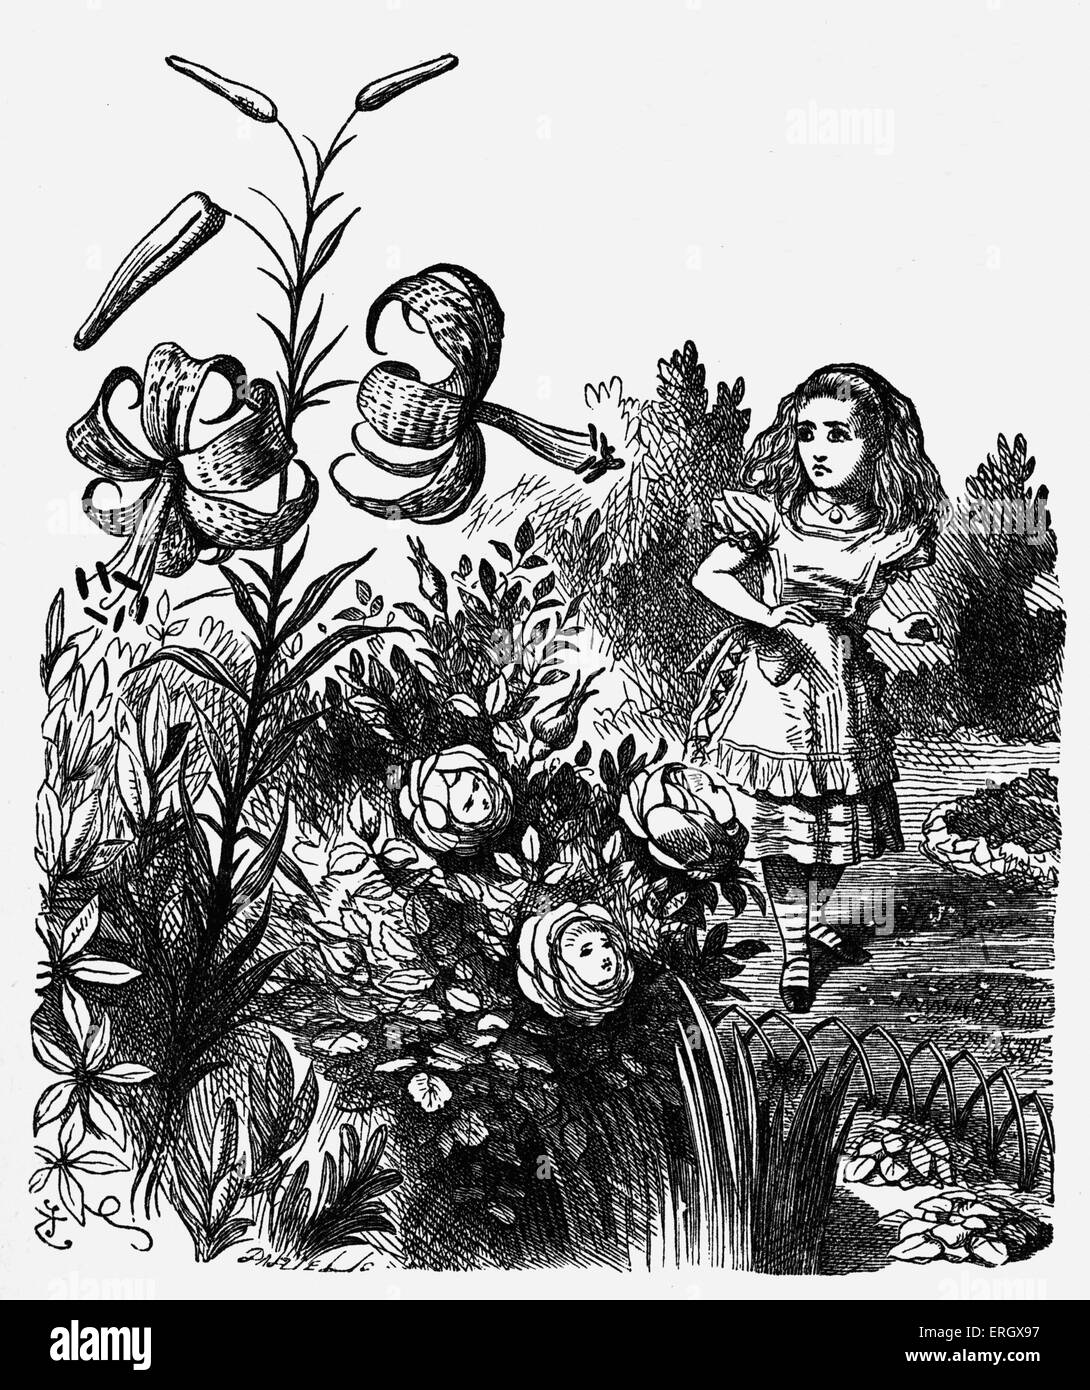 Lewis Carroll 's book 'Through the Looking-glass and what Alice found there'.  Illustrated by John Tenniel. Description of Stock Photo